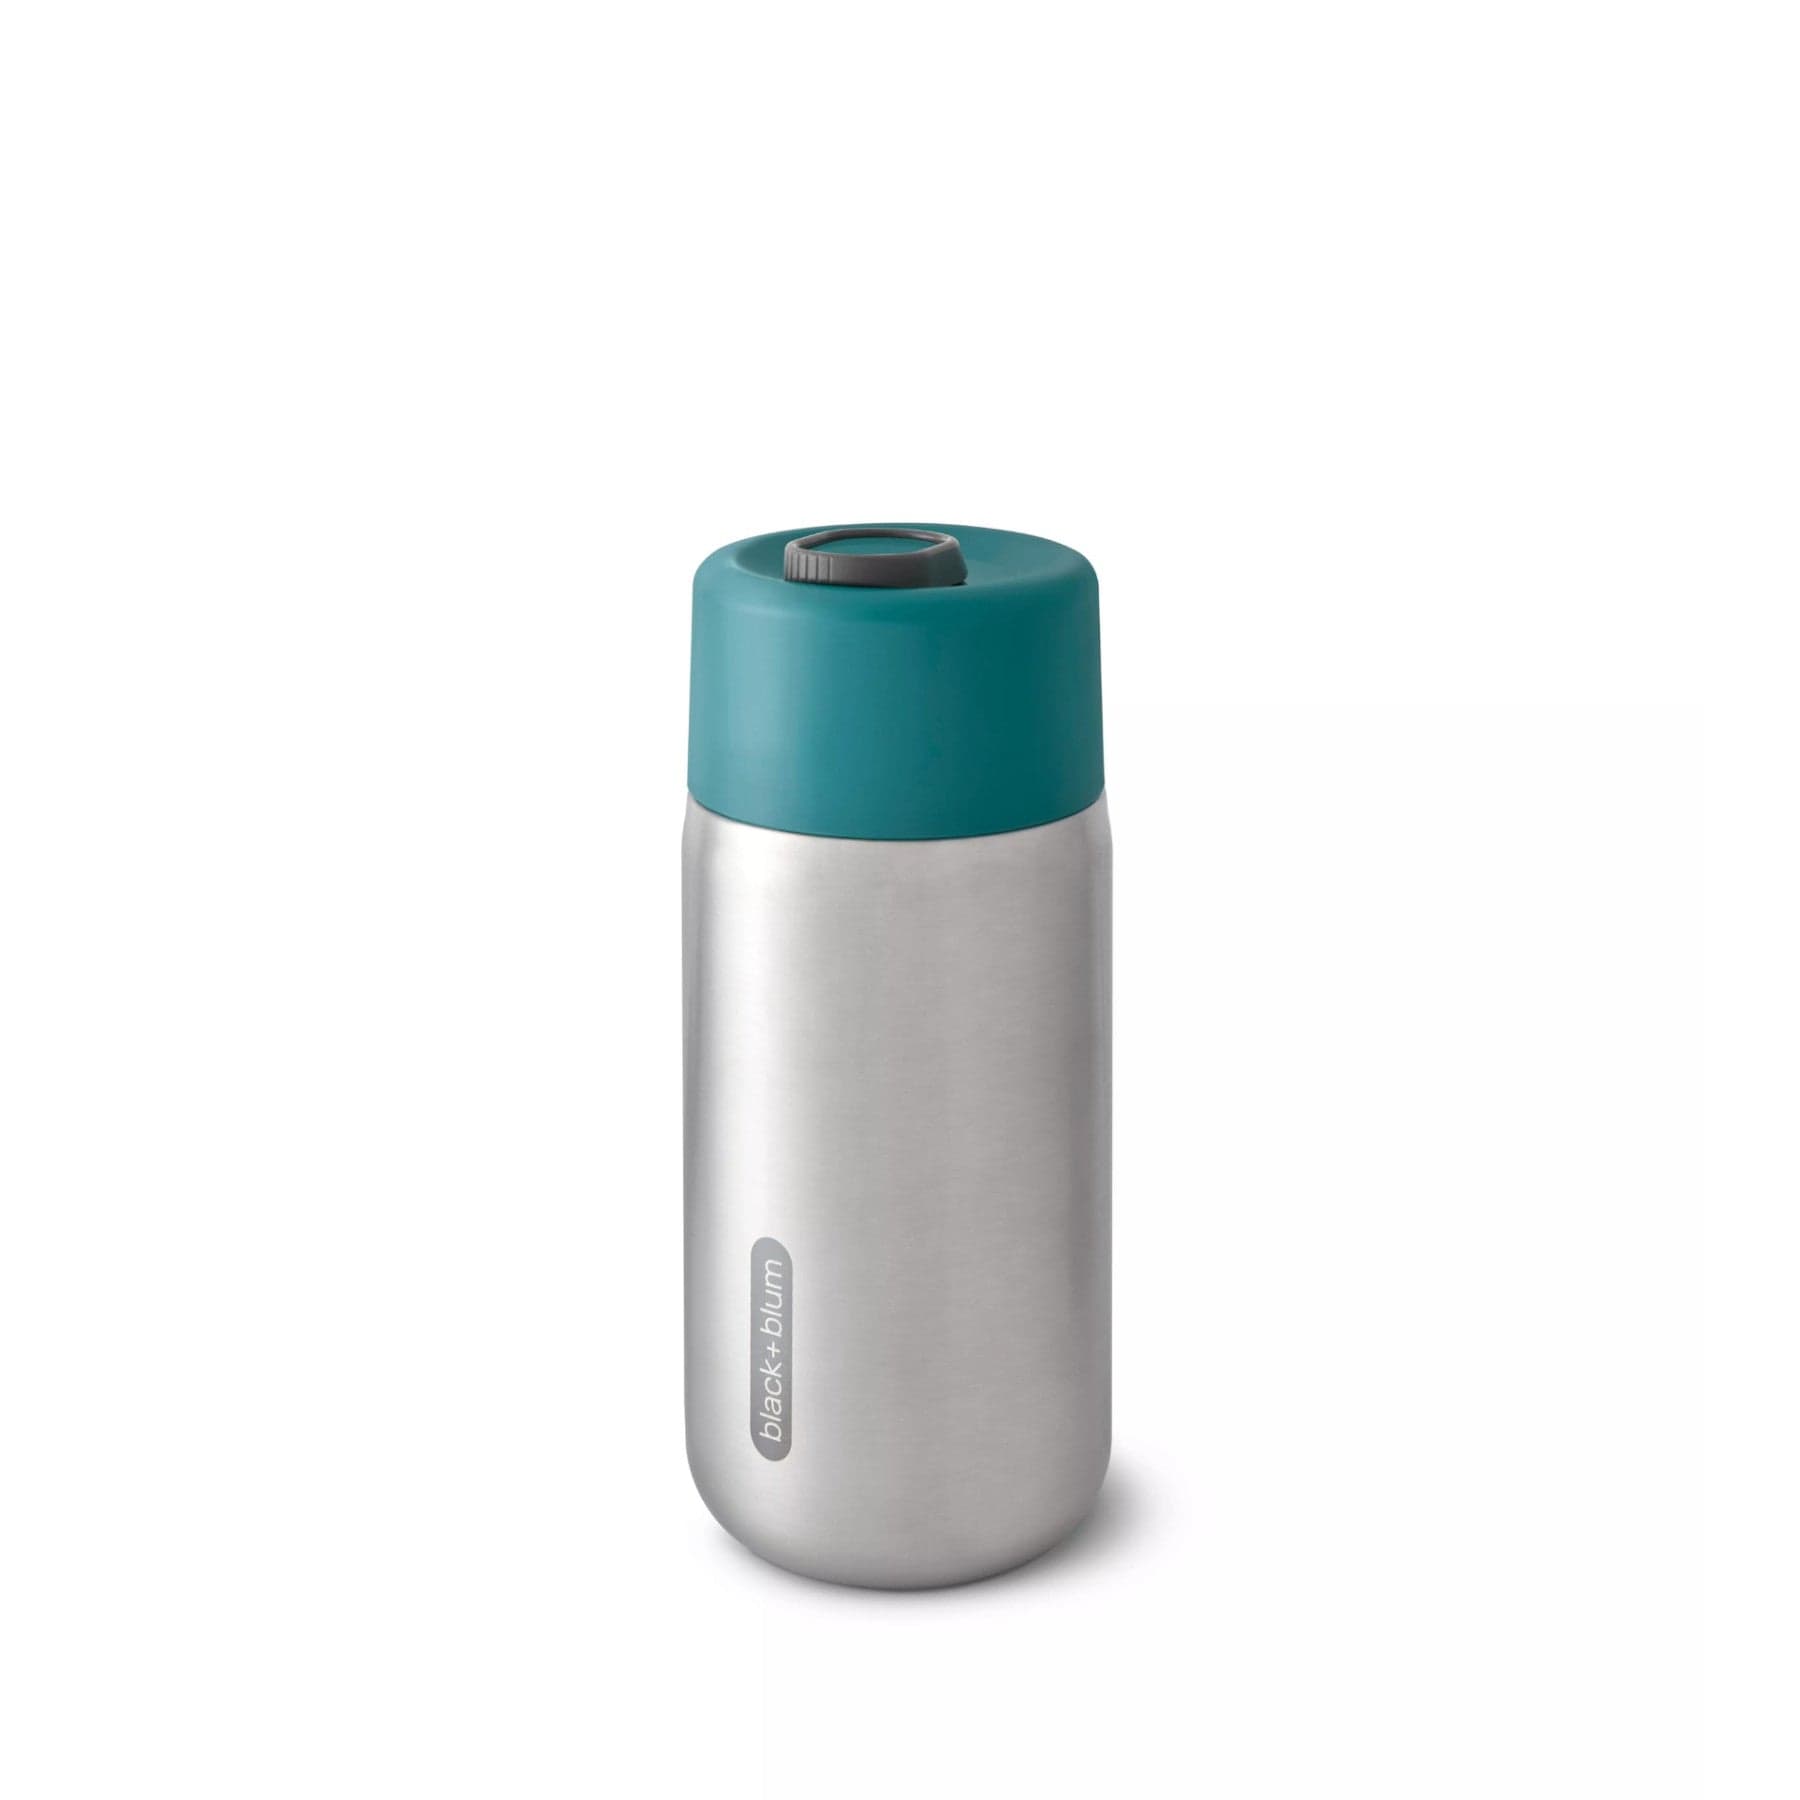 Stainless steel insulated water bottle with teal lid on white background